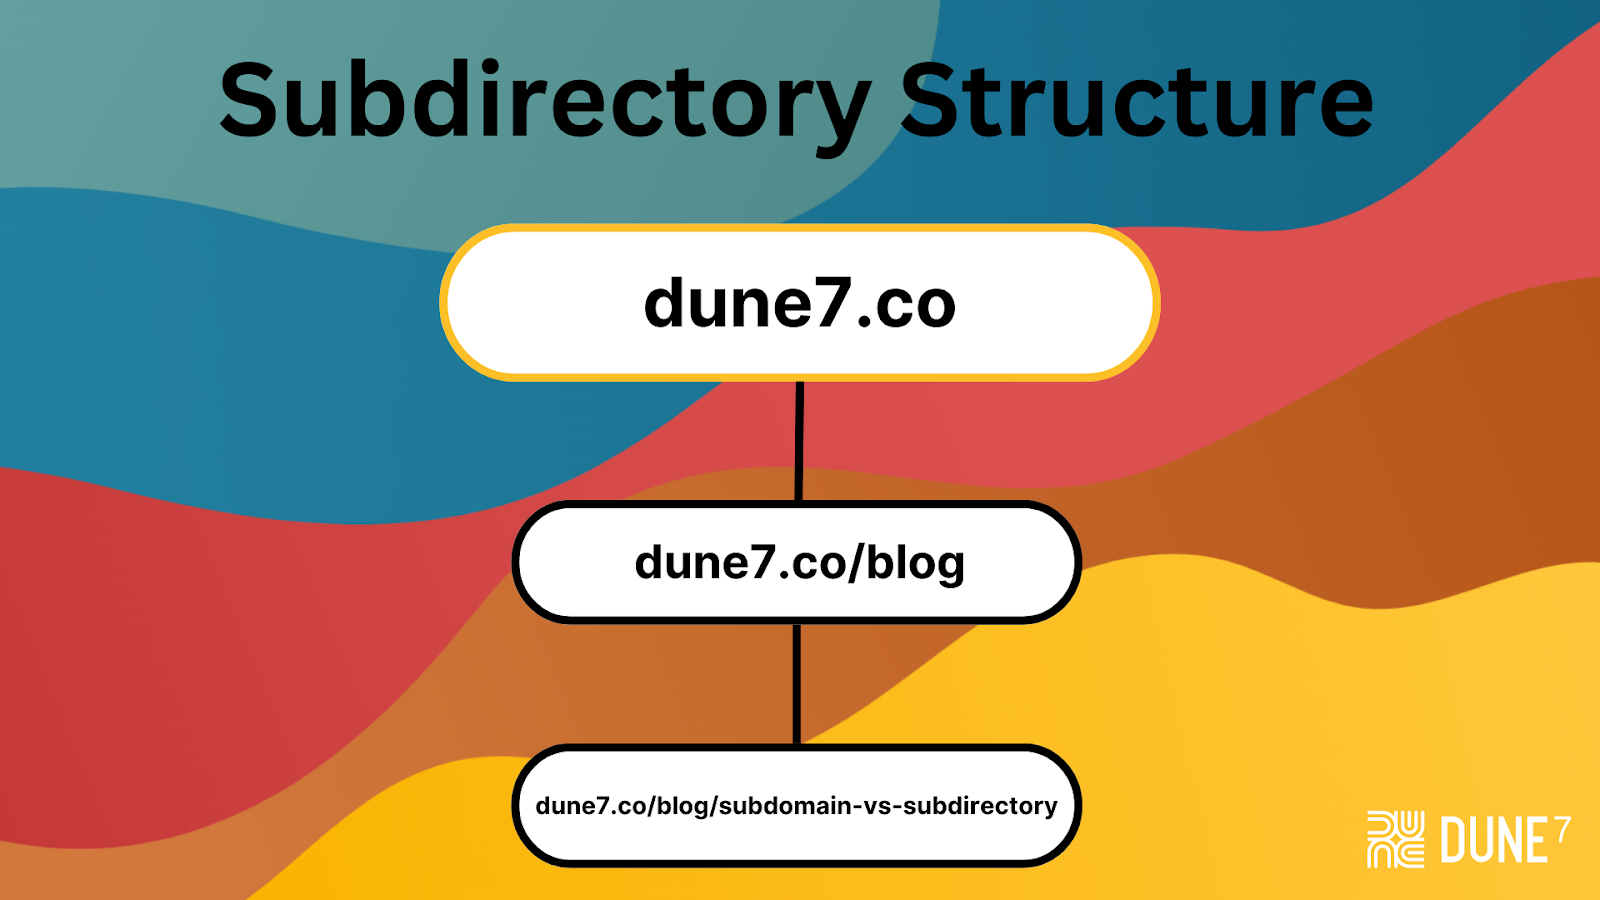 Subdirectory structure graphic using dune7.co as an example